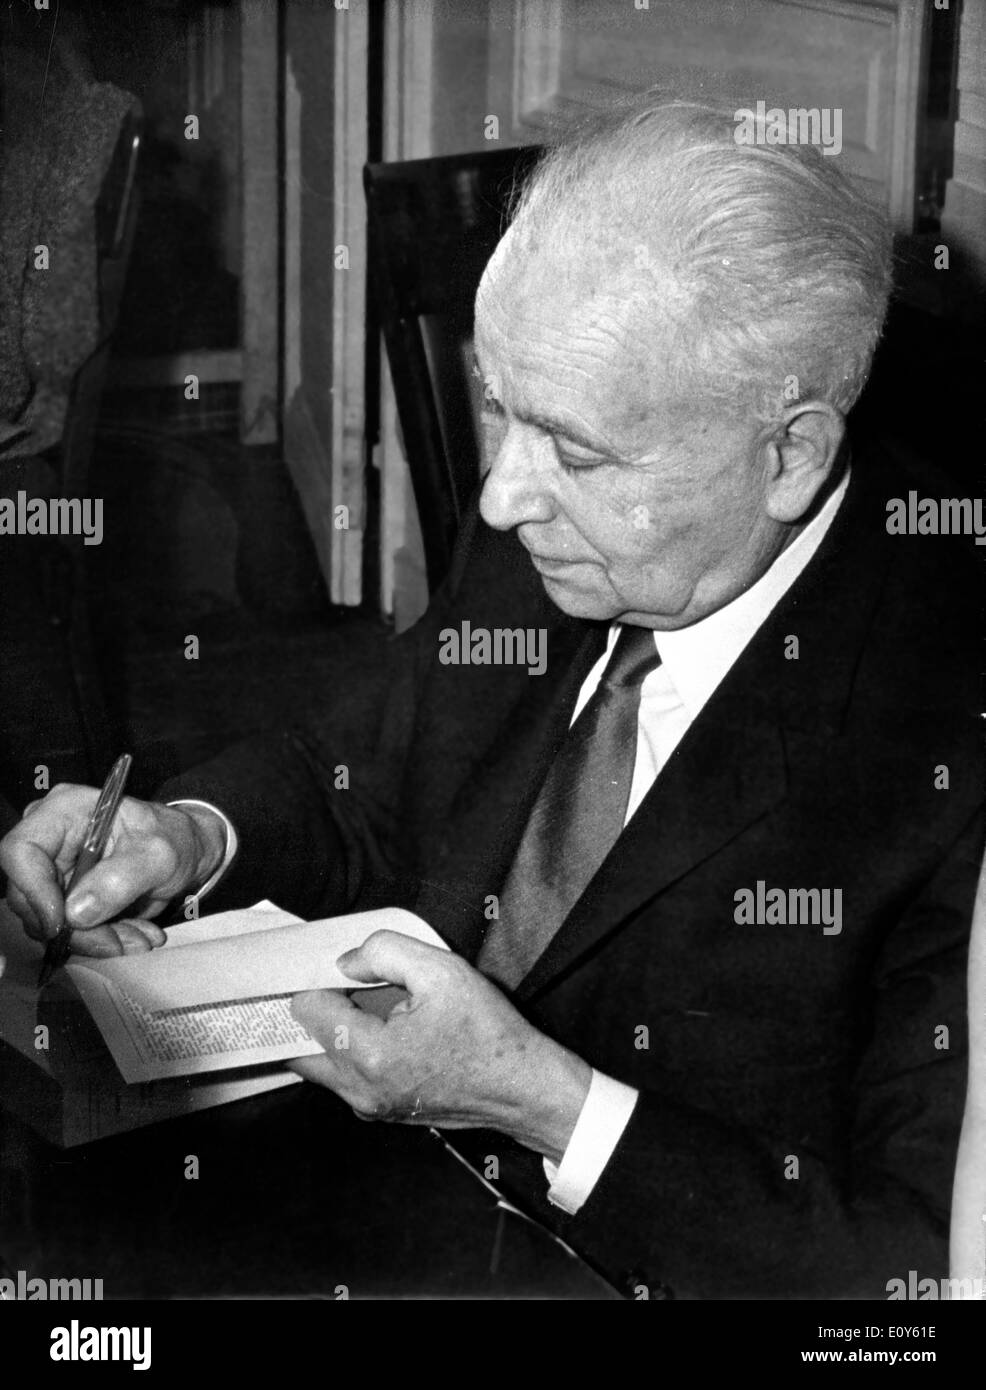 Dec 02, 1968; Paris, France; The annual sale of books by the authors was held at Palais D'Orsay in Paris, yesterday. The proceeds of the sale sponsored by the National Committee of Writers go for the benefit of needy members. The picture shows the famous poet LOUIS ARAGON autographing his books during the sale. Stock Photo